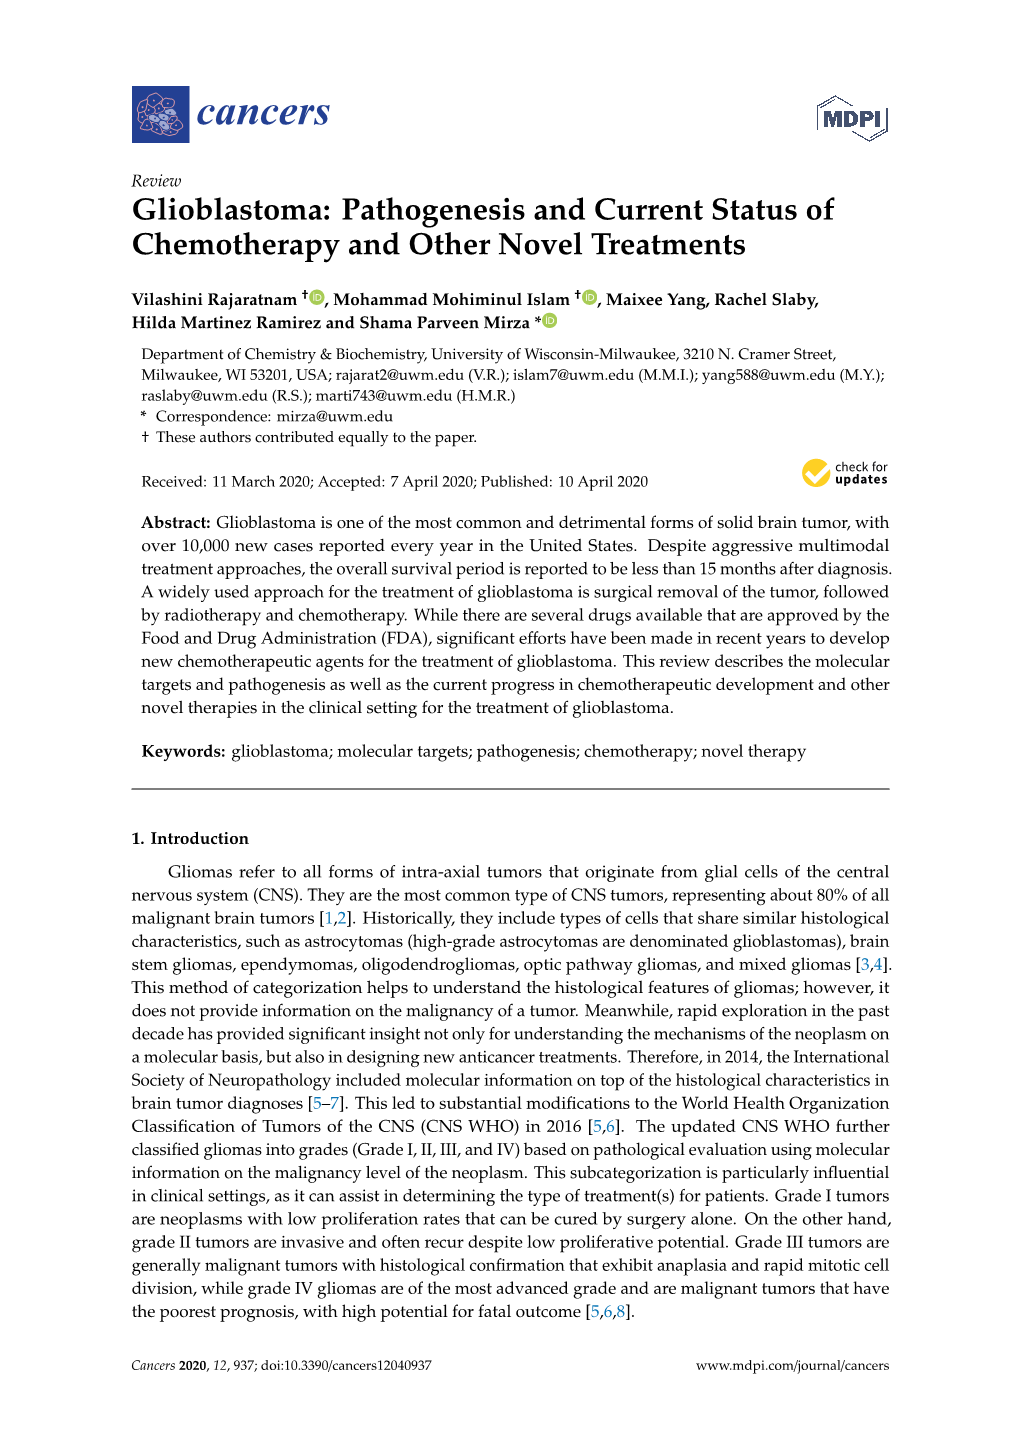 Glioblastoma: Pathogenesis and Current Status of Chemotherapy and Other Novel Treatments